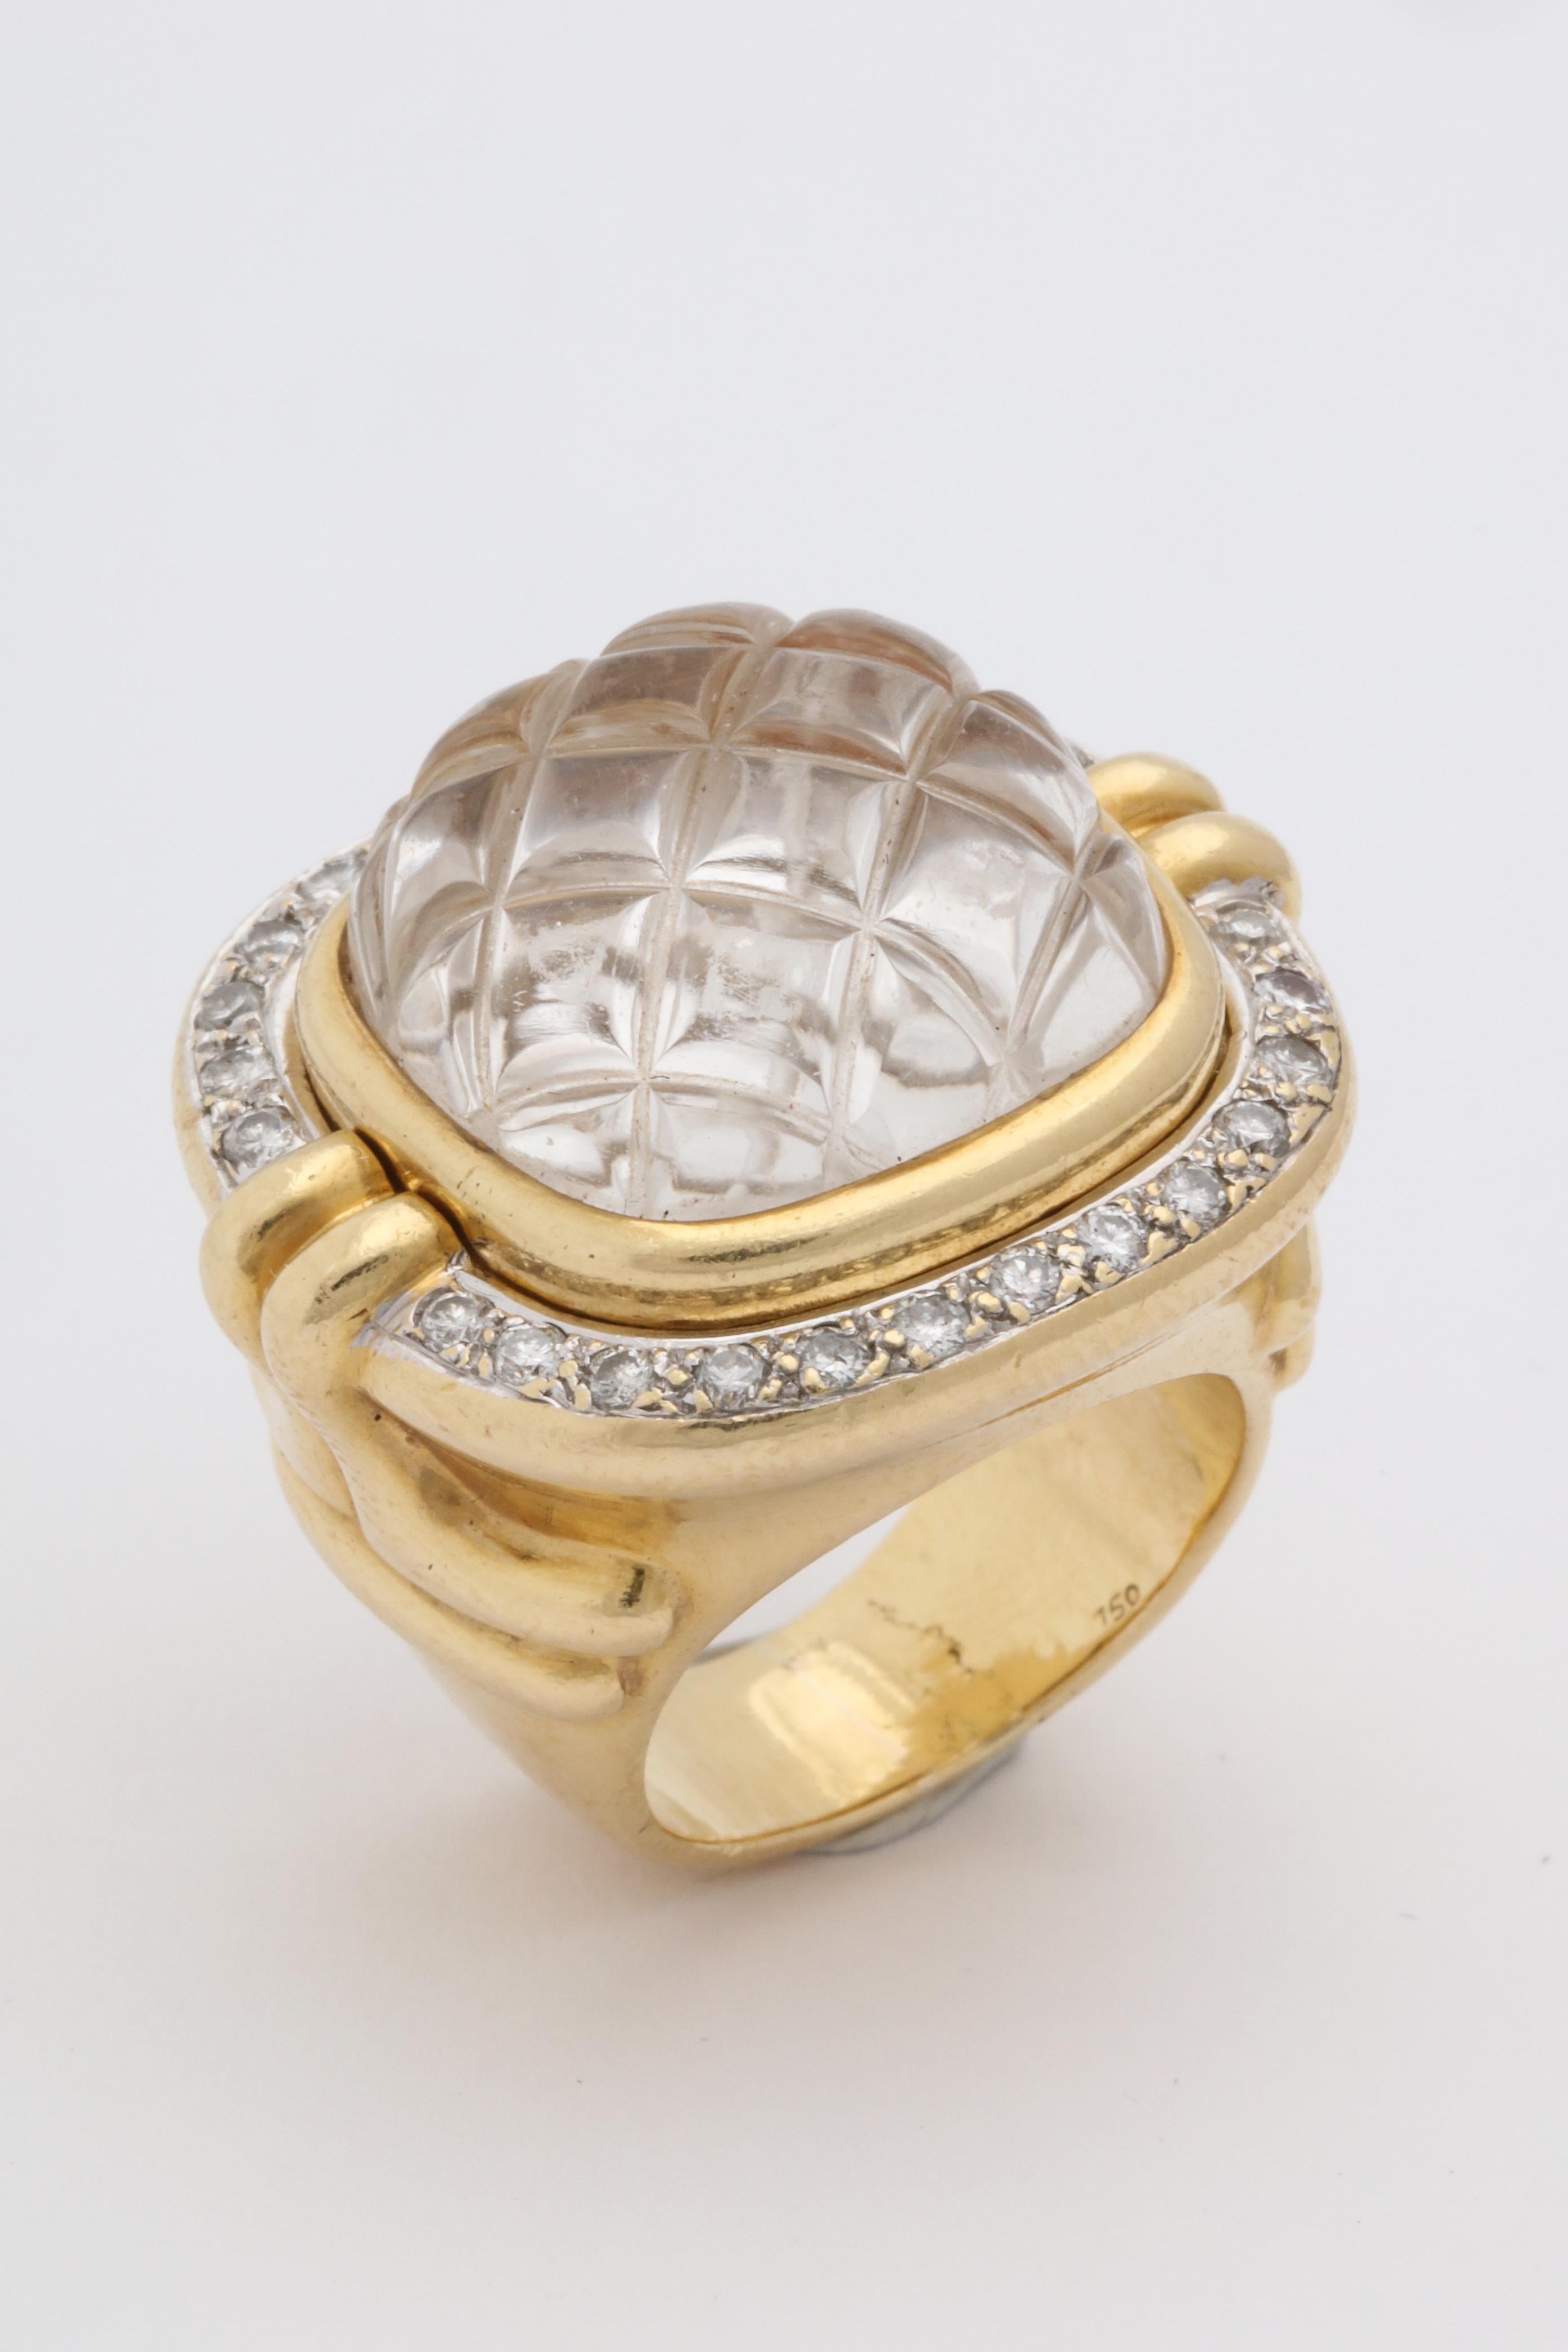 1980 Heavy Quilted Rock Crystal with Diamonds Fantasy Large Gold Cocktail Ring 8